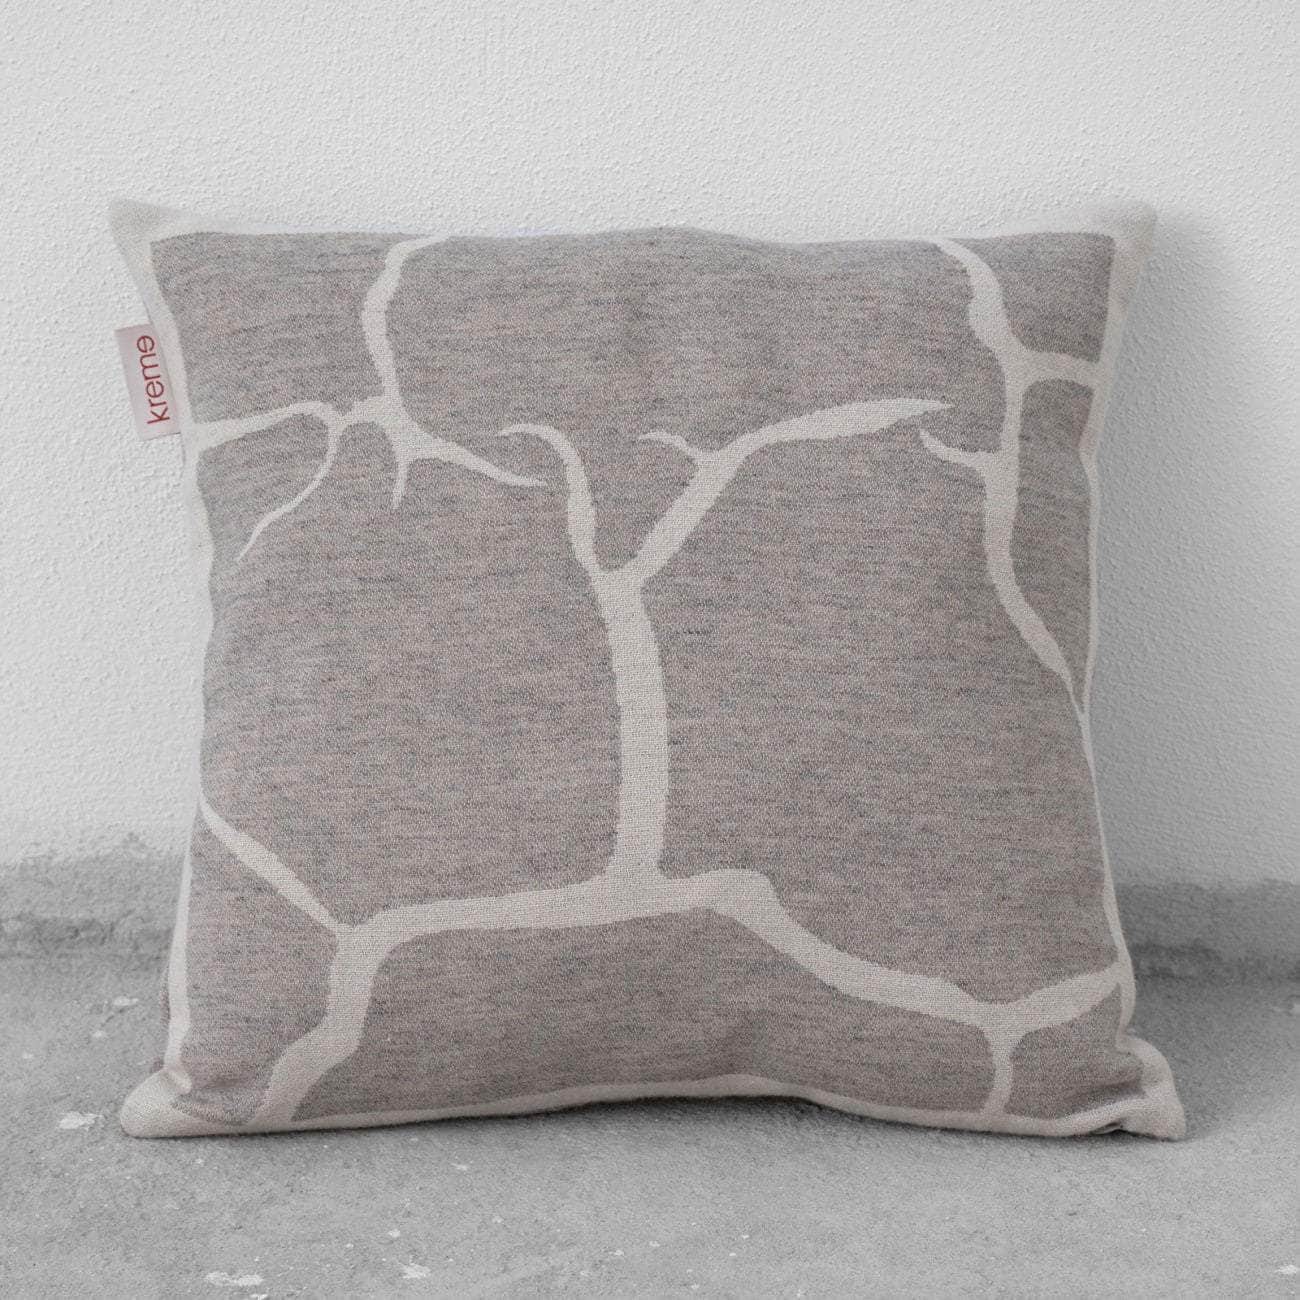 Dry Land Cushion Cover